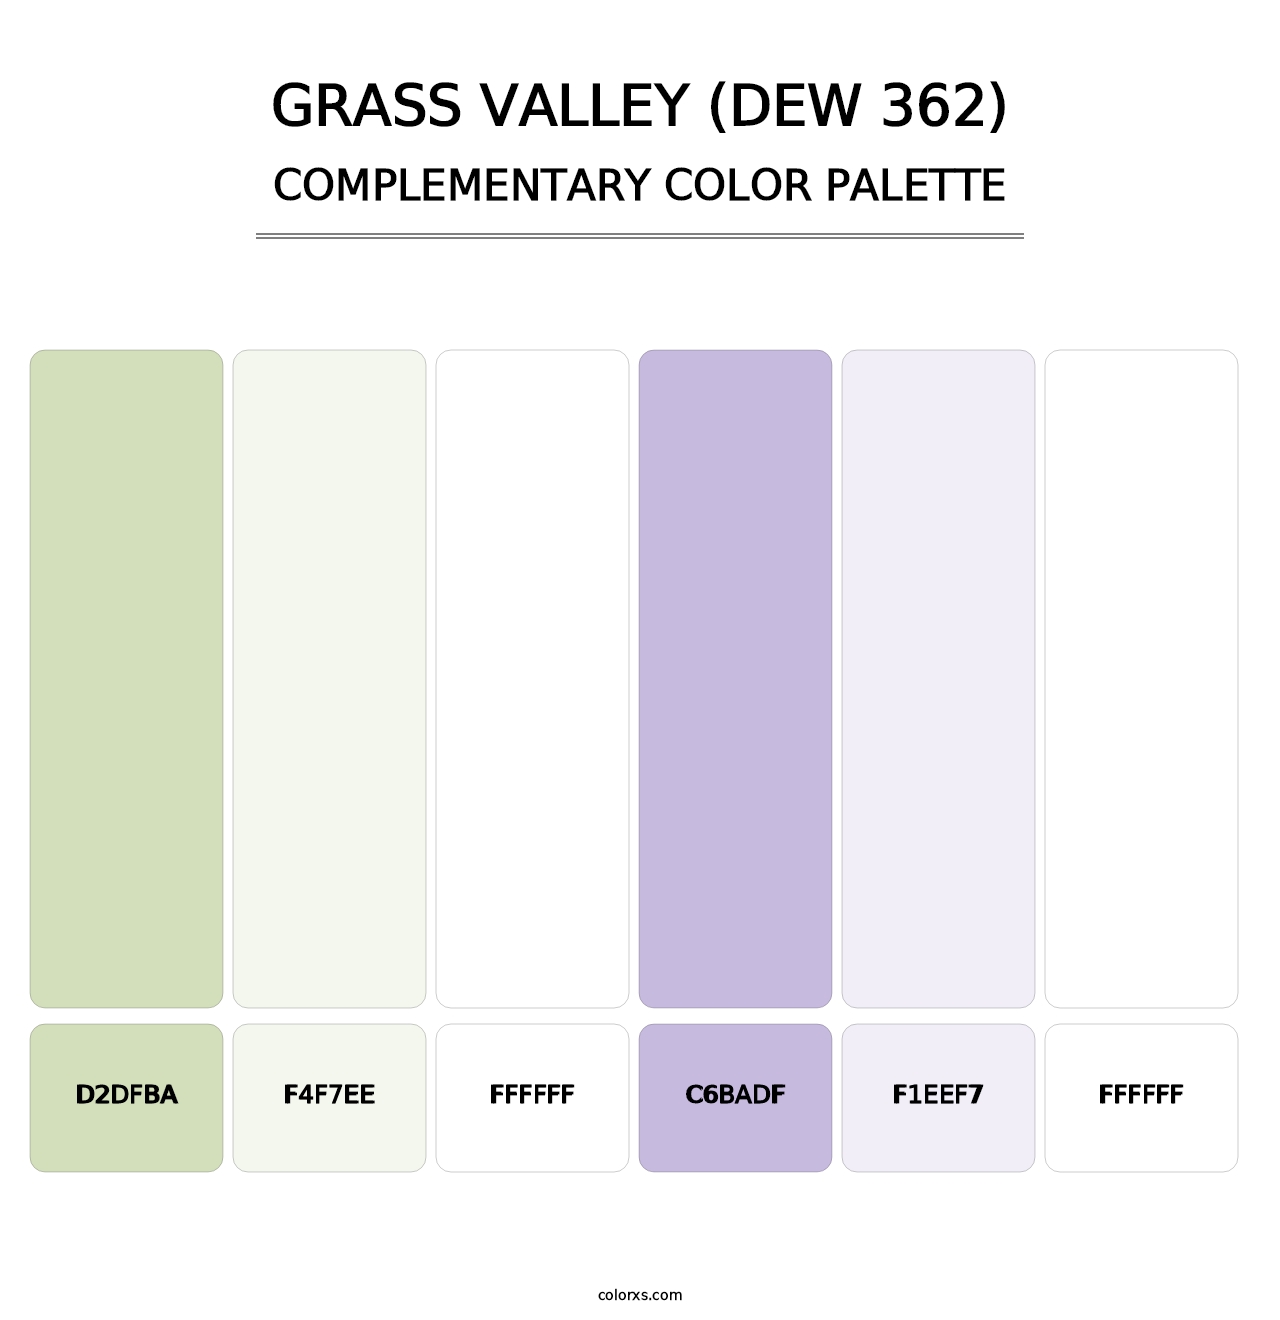 Grass Valley (DEW 362) - Complementary Color Palette